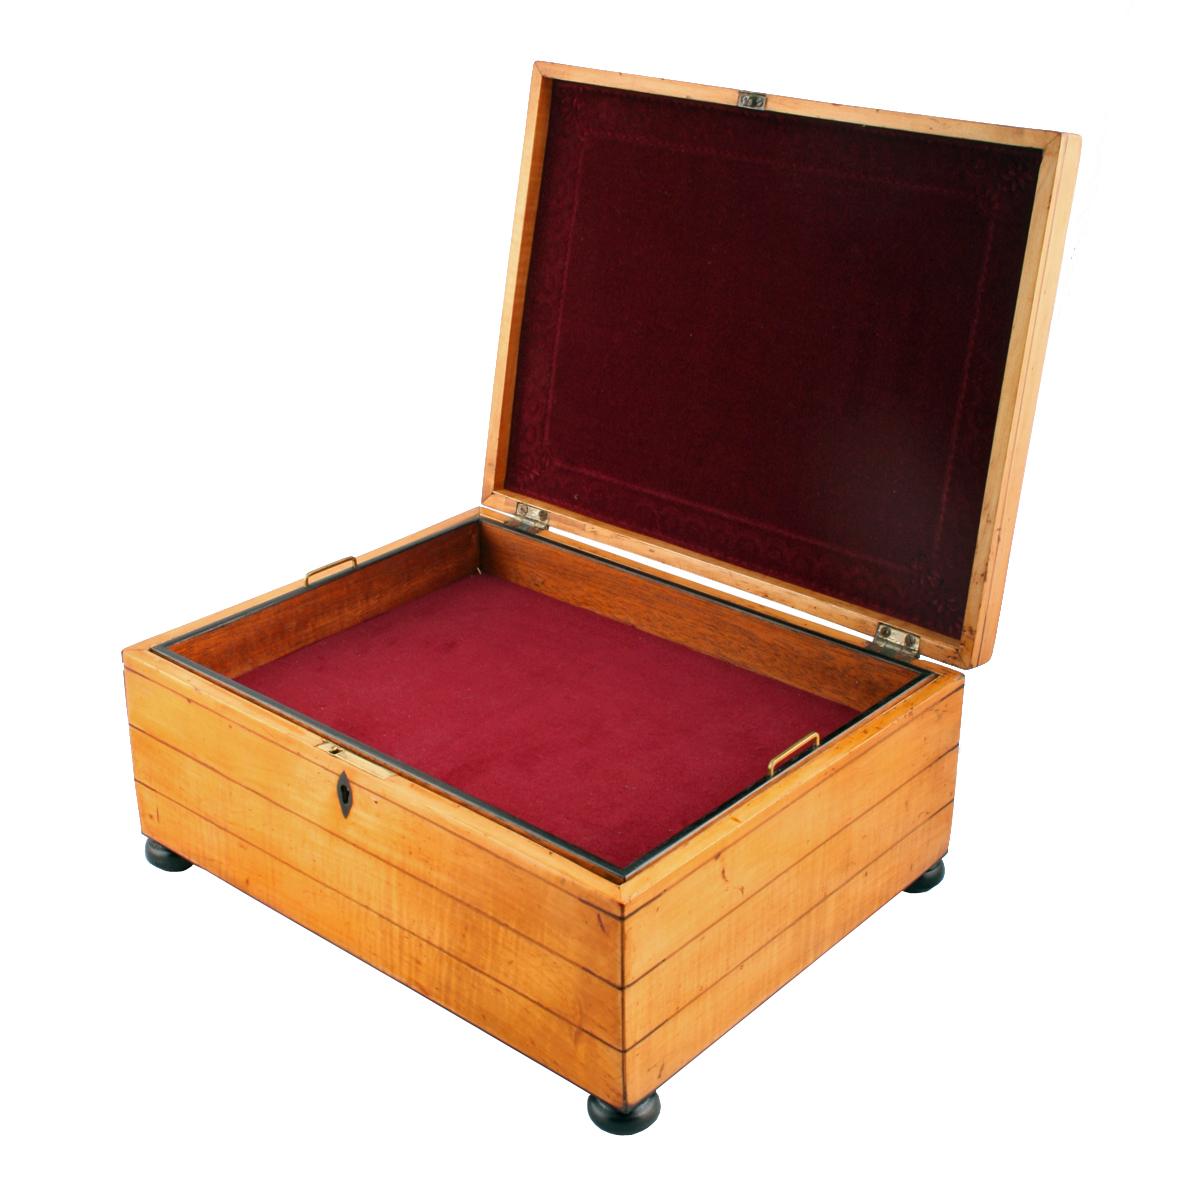 A fine Regency oblong shaped satinwood and inlaid jewel box.

The box stands on ebonised bun feet with a working lock and key and a lift out tray.

The box is veneered and inlaid with a wide variety of woods, the front, back and sides with long